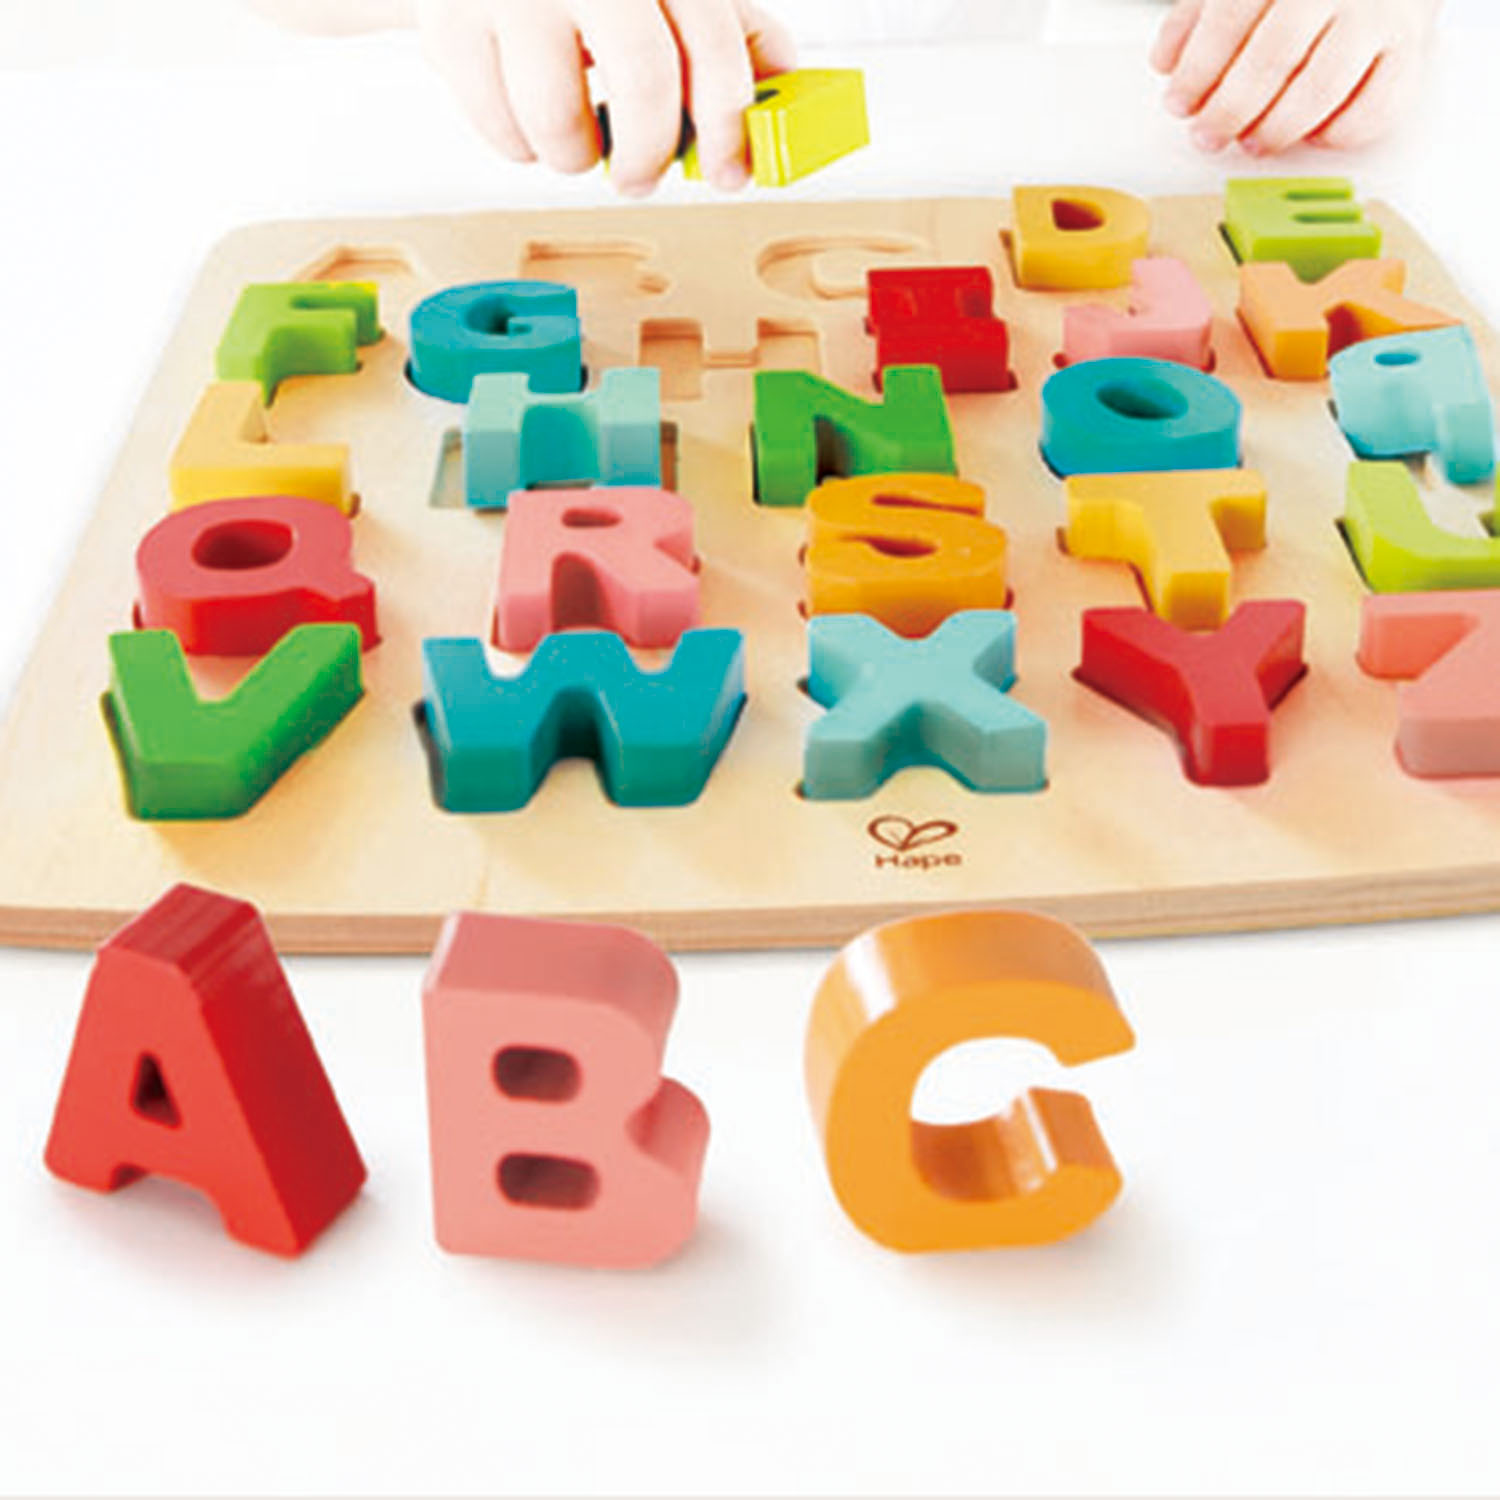 Hape E1452 Chunky Toy Jigsaw Puzzle Inc 3 Piece Baby Toddler Children 12 Months for sale online 